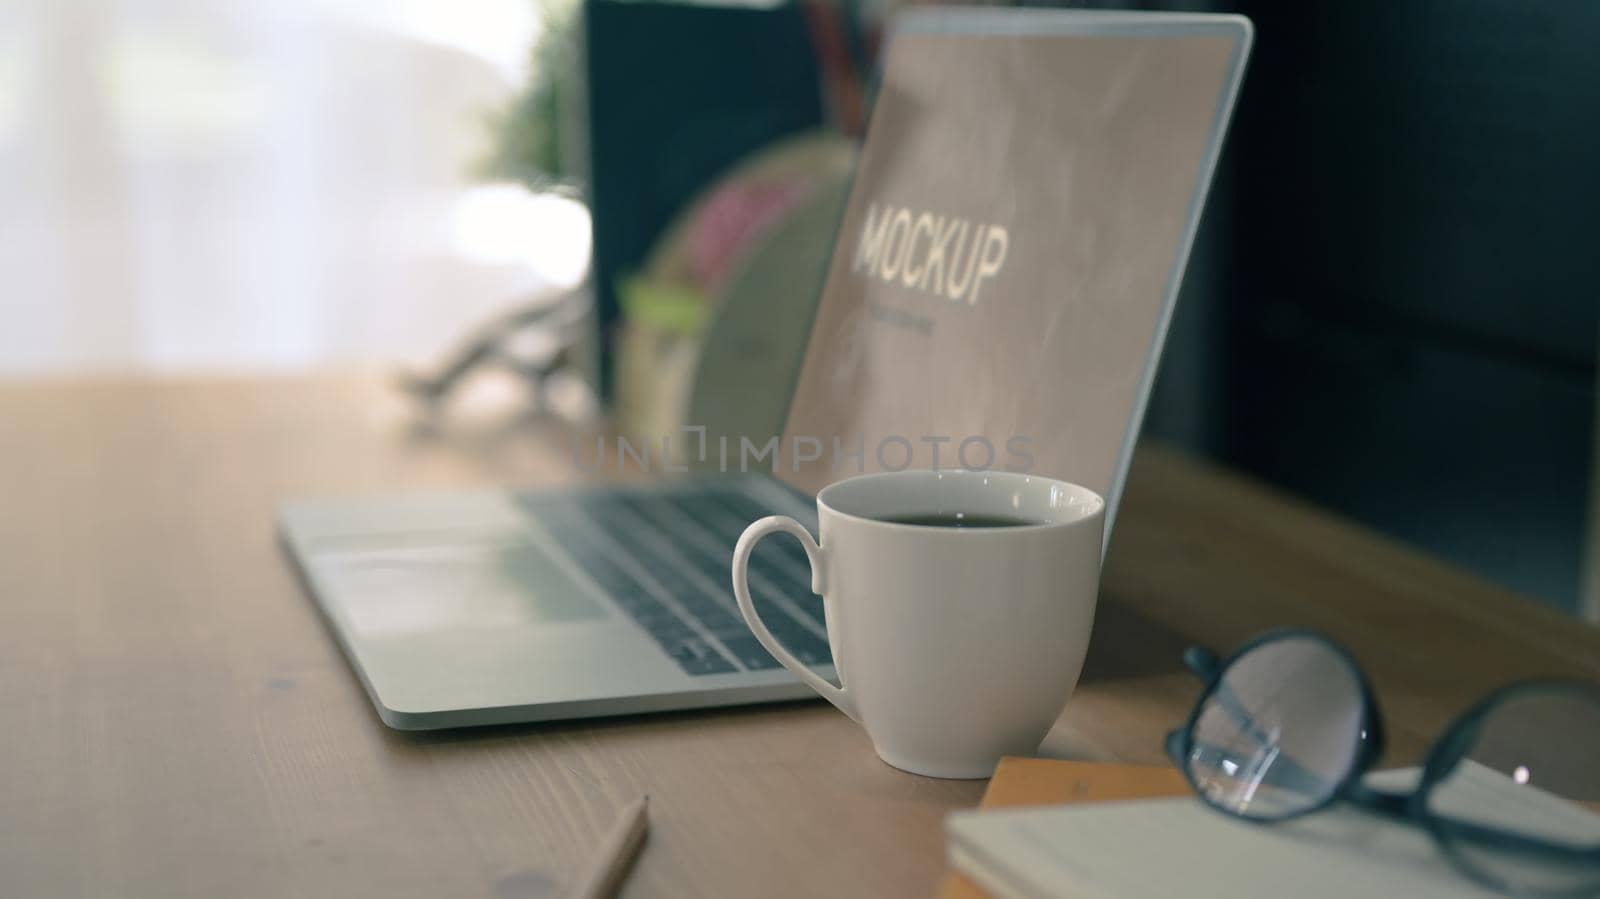 Computer laptop, coffee cup, glasses and notebook on wooden table. Comfortable workplace.